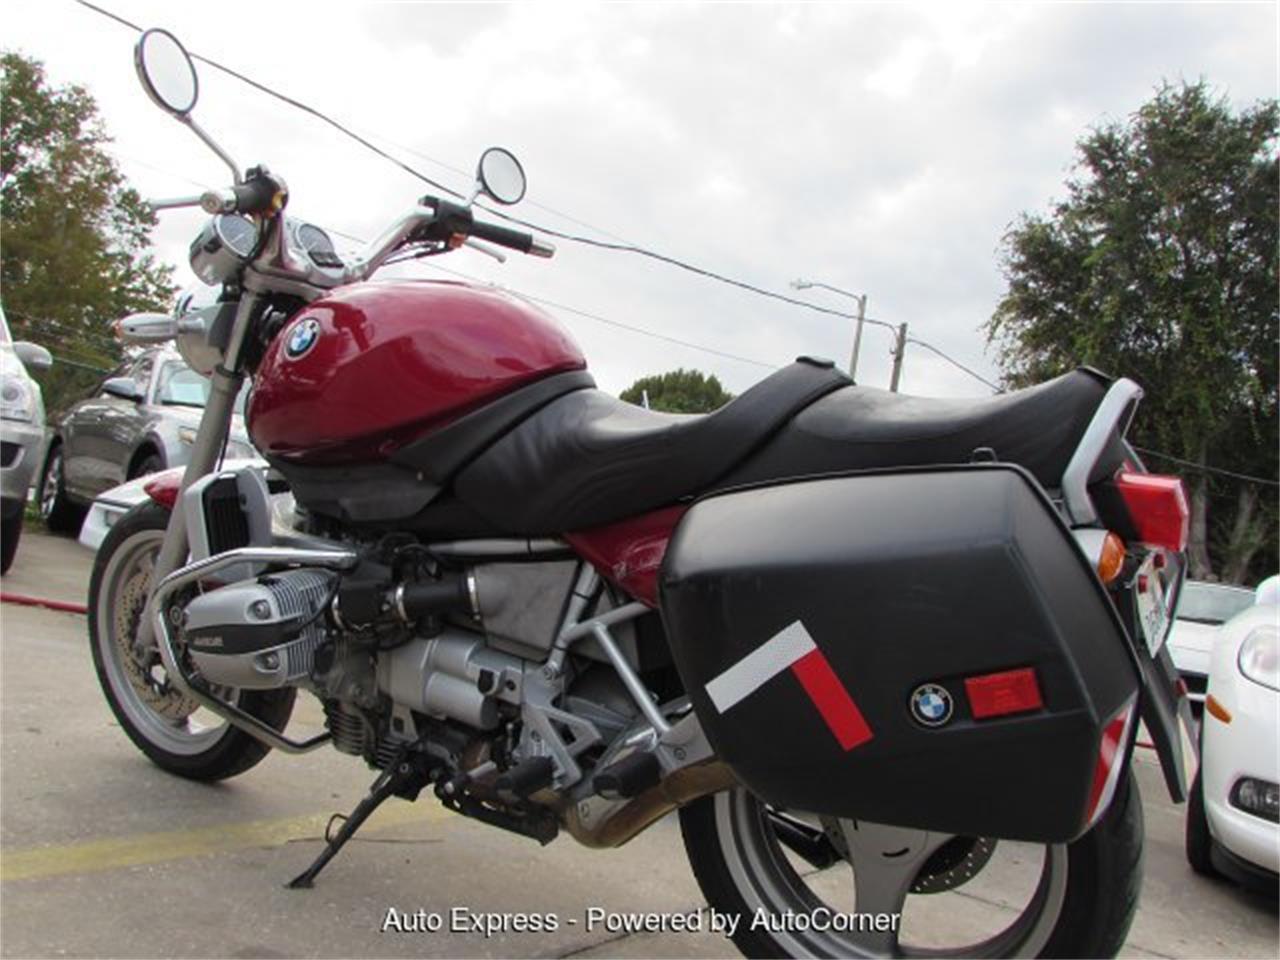 1998 BMW Motorcycle for Sale | ClassicCars.com | CC-1134836